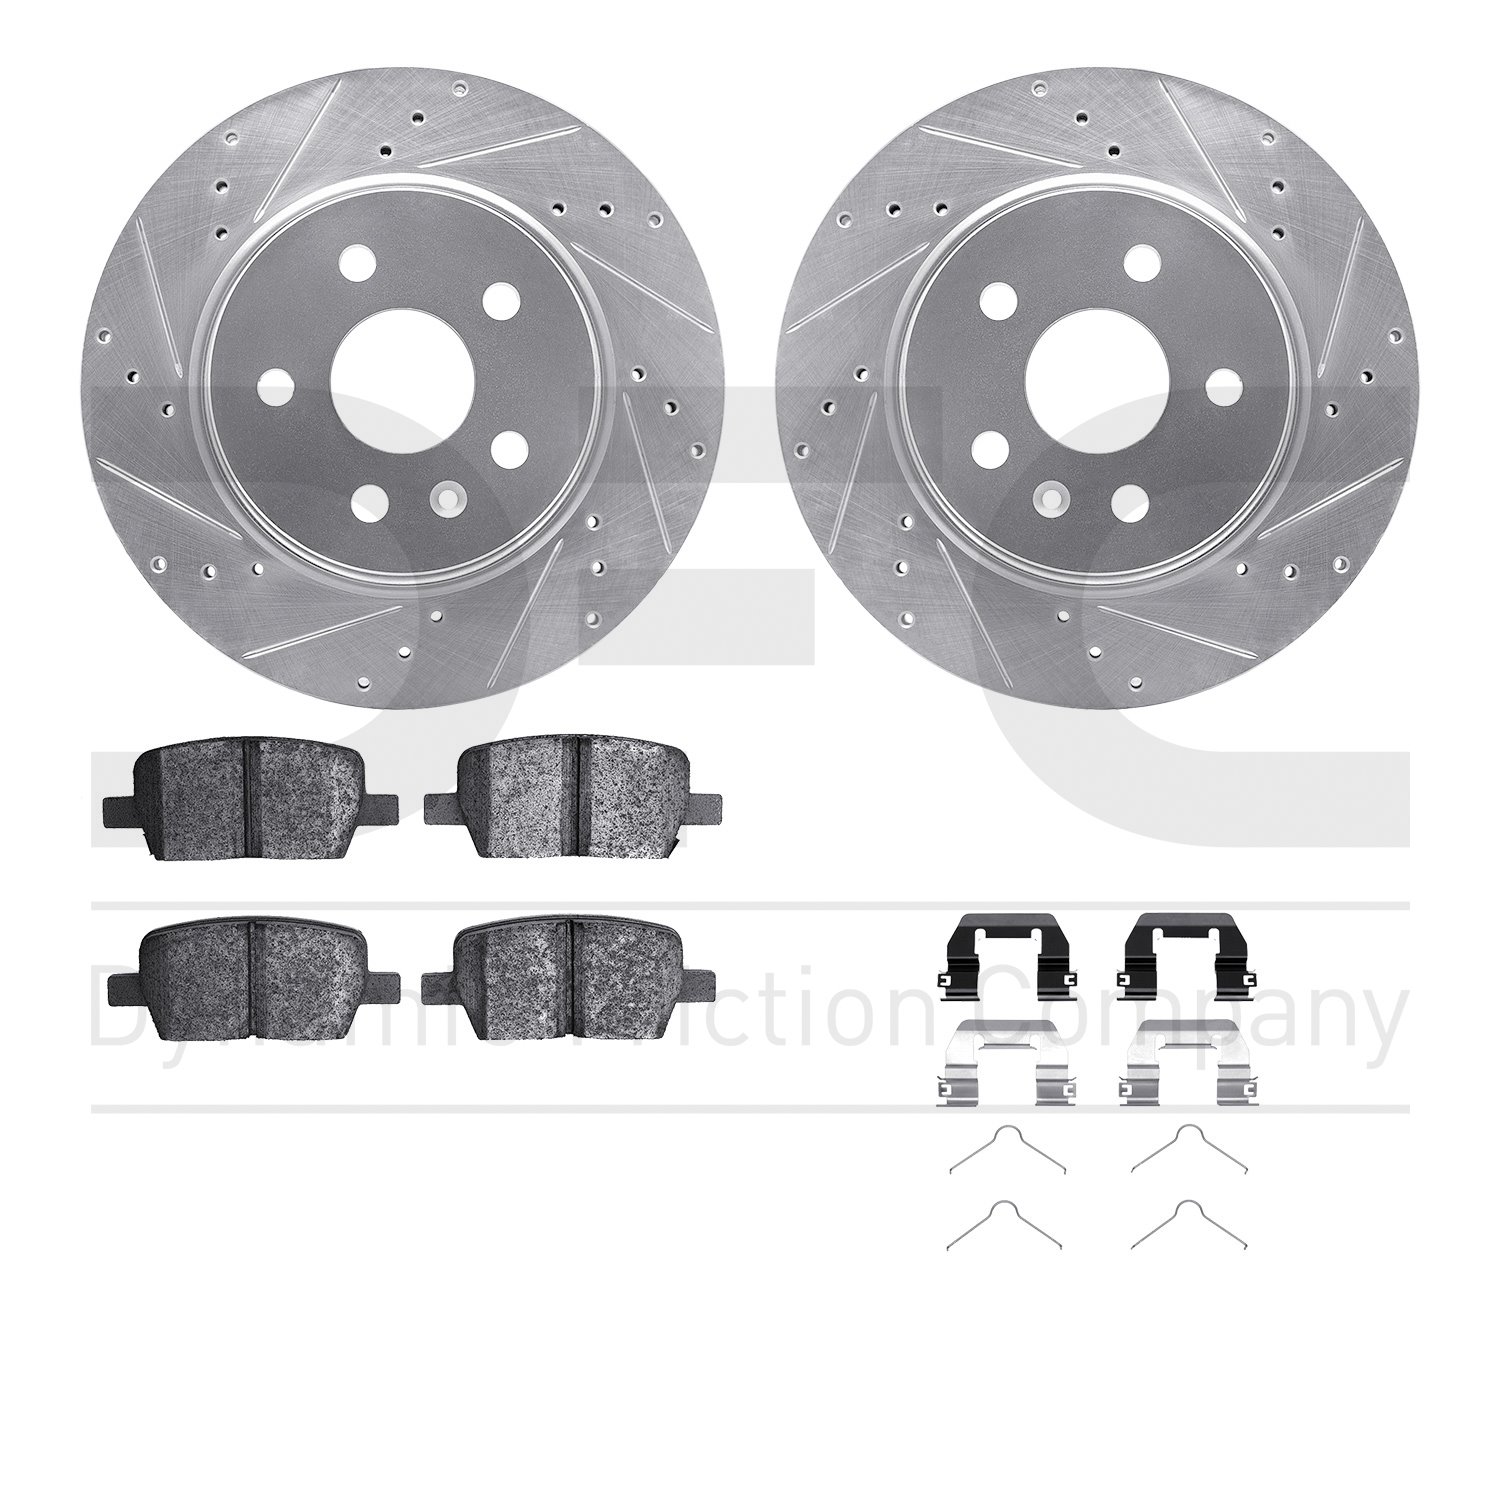 7612-65018 Drilled/Slotted Brake Rotors w/5000 Euro Ceramic Brake Pads Kit & Hardware [Silver], Fits Select GM, Position: Rear